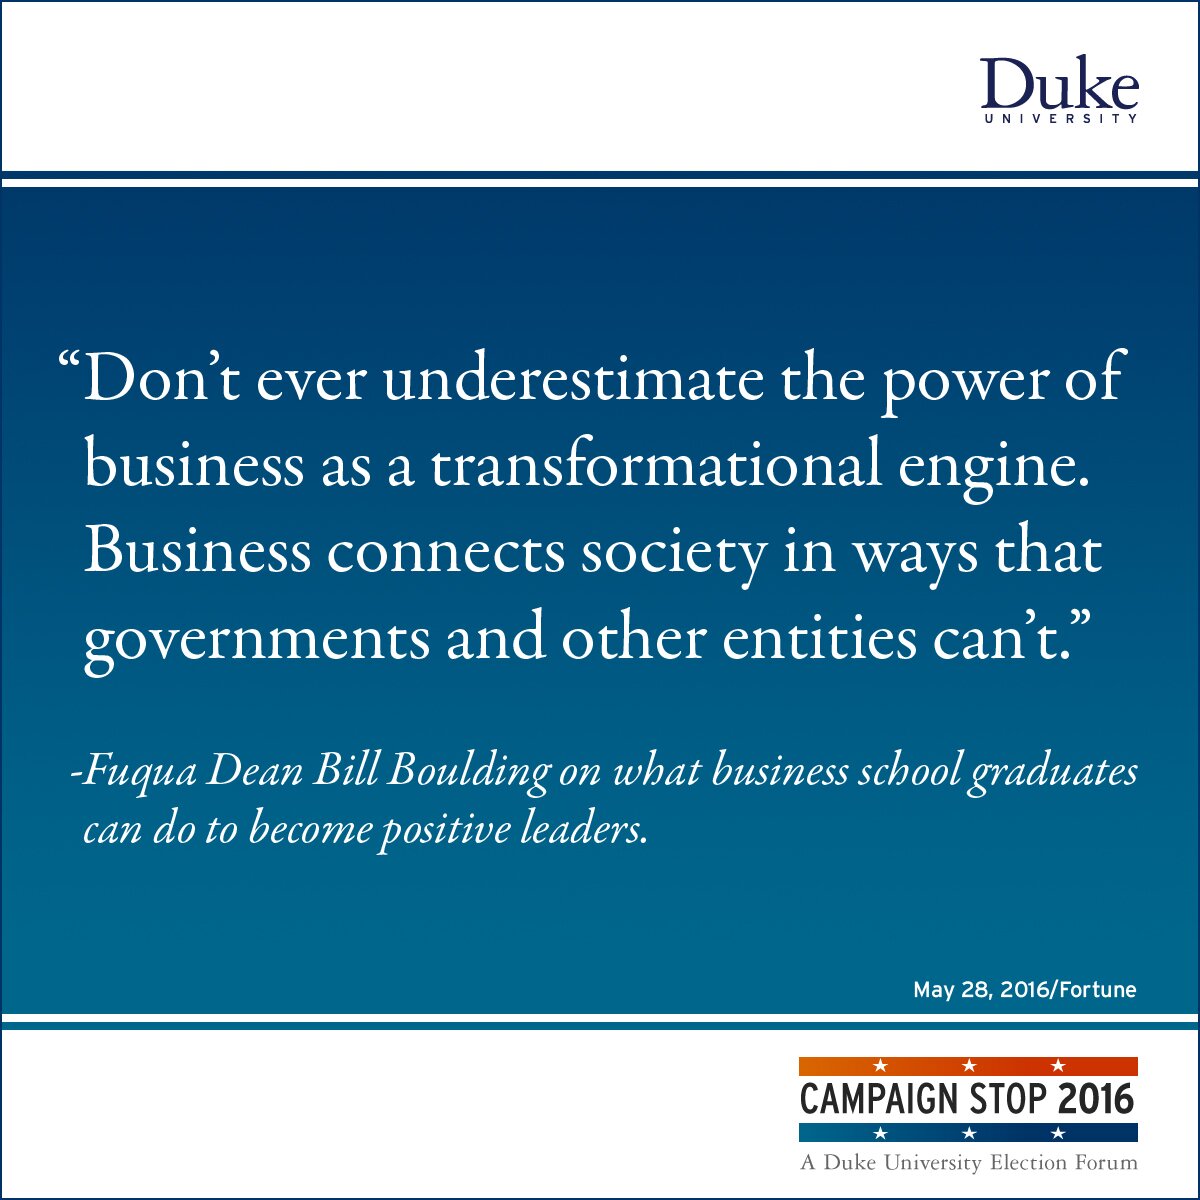 “Don’t ever underestimate the power of business as a transformational engine. Business connects society in ways that governments and other entities can’t.” -Fuqua Dean Bill Boulding on what business school graduates can do to become positive leaders.